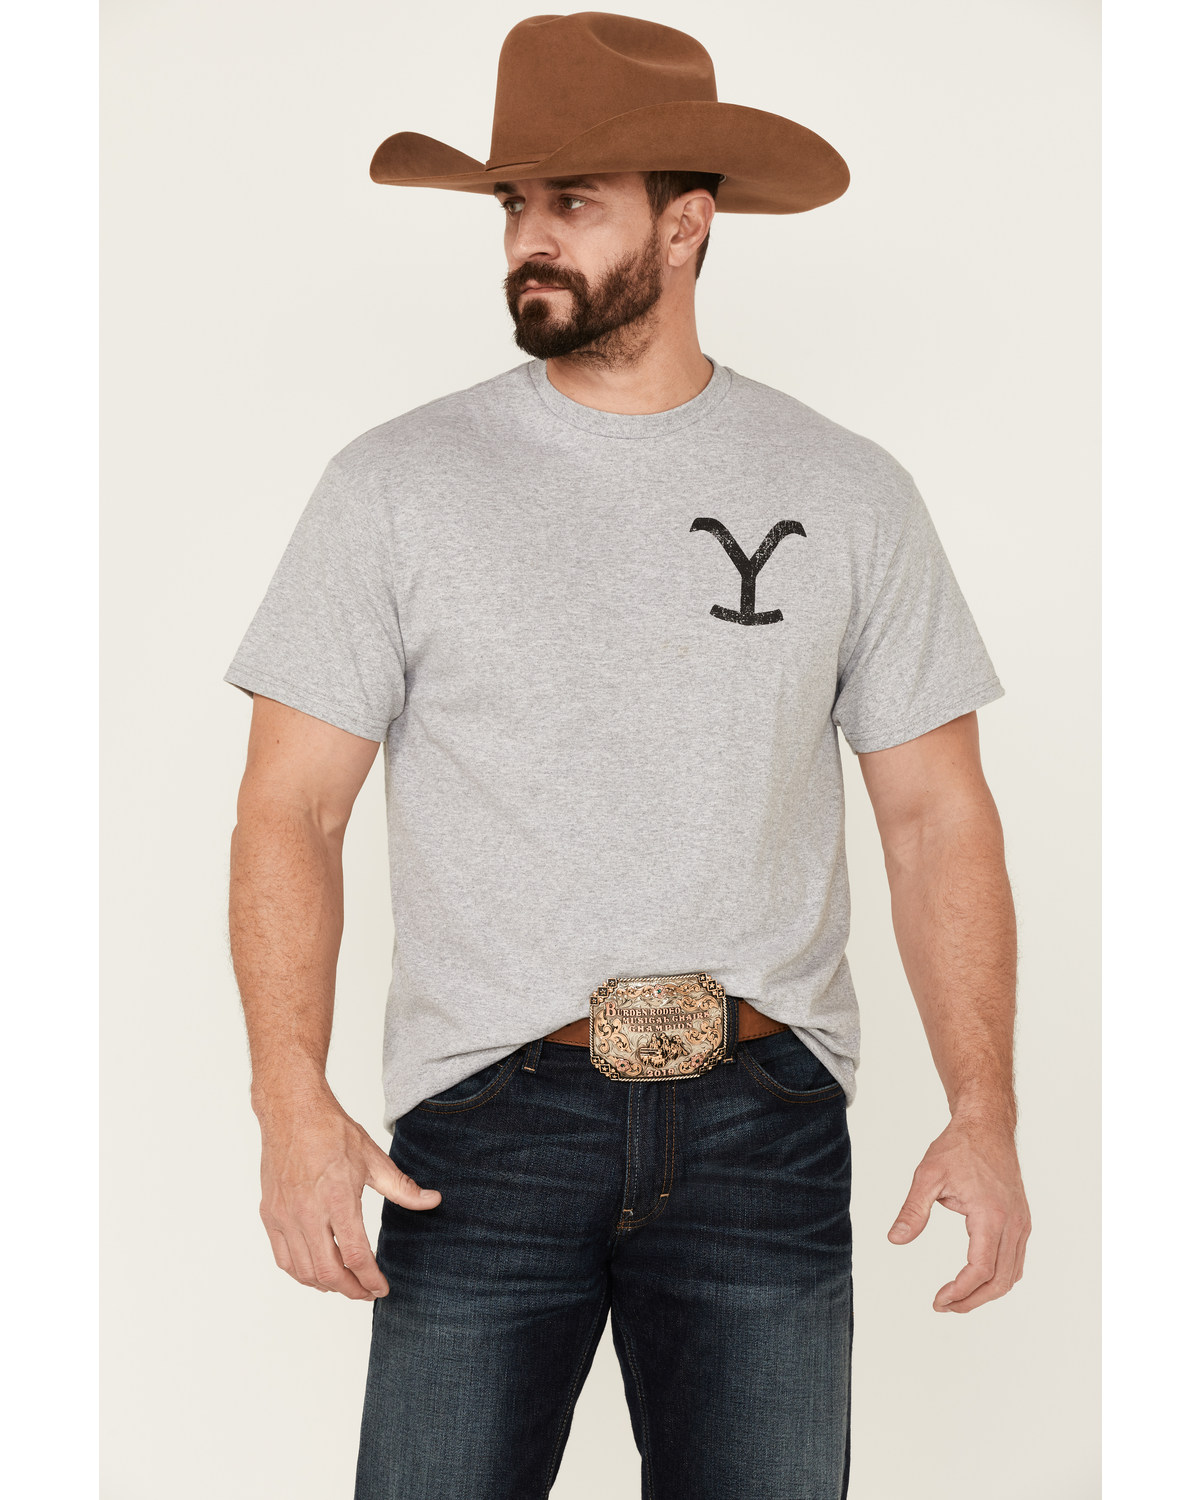 Changes Men's Yellowstone Rip For The Brand Graphic Short Sleeve T-Shirt